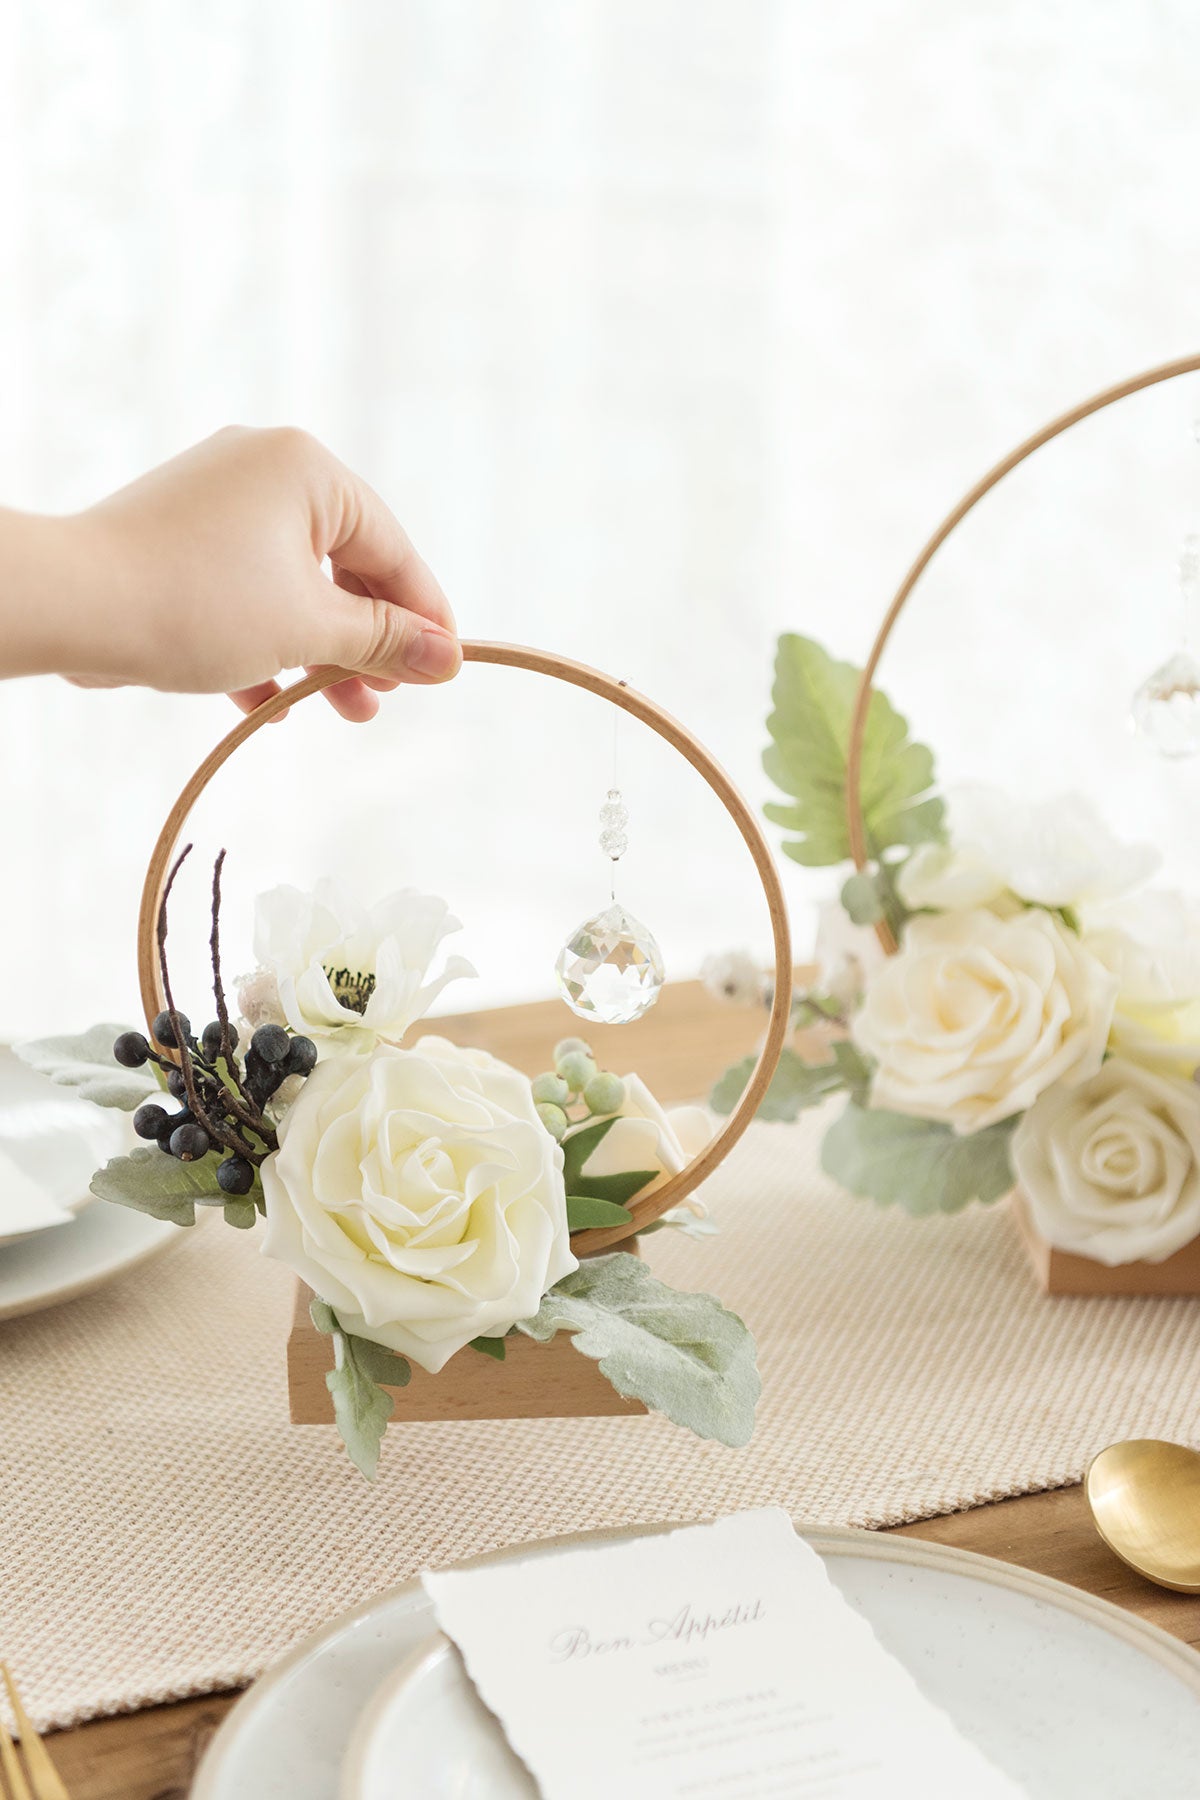 Wedding Centerpieces  DIY Wood Centerpiece Kits (Set of 3) - with Crystal  – Ling's Moment